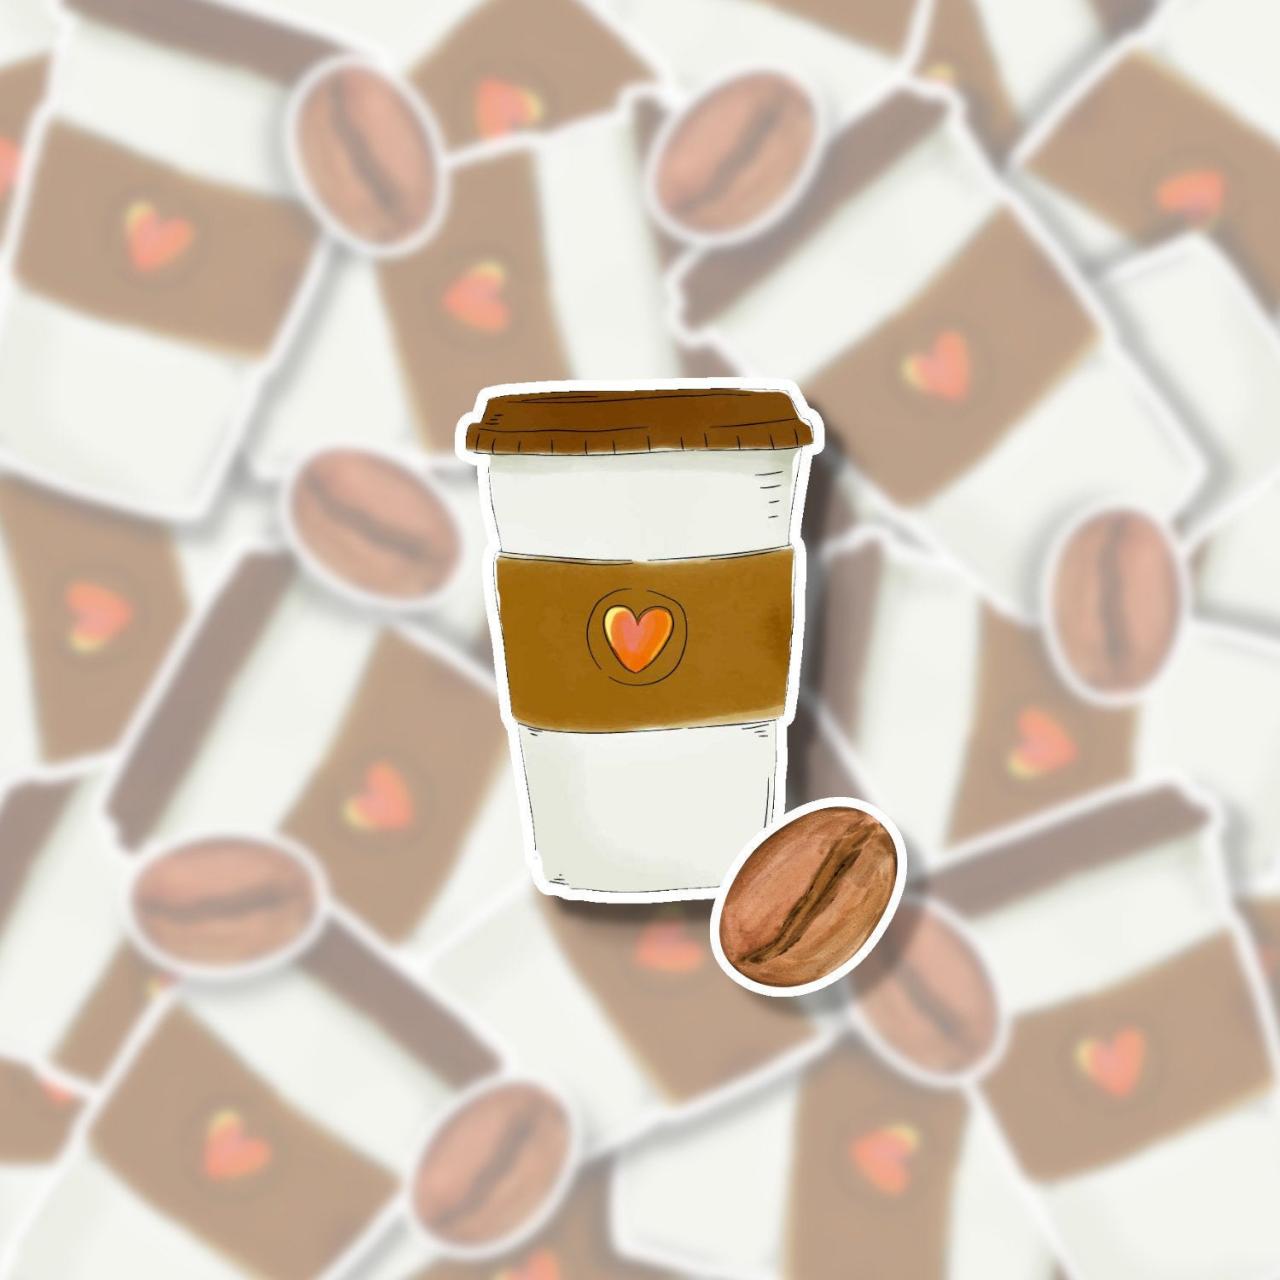 Coffee Sticker Pack | 2 Coffee Stickers | Coffee Cup Sticker | Starbucks Sticker | Coffee Bean Sticker | Tumbler Sticker | Small Gift